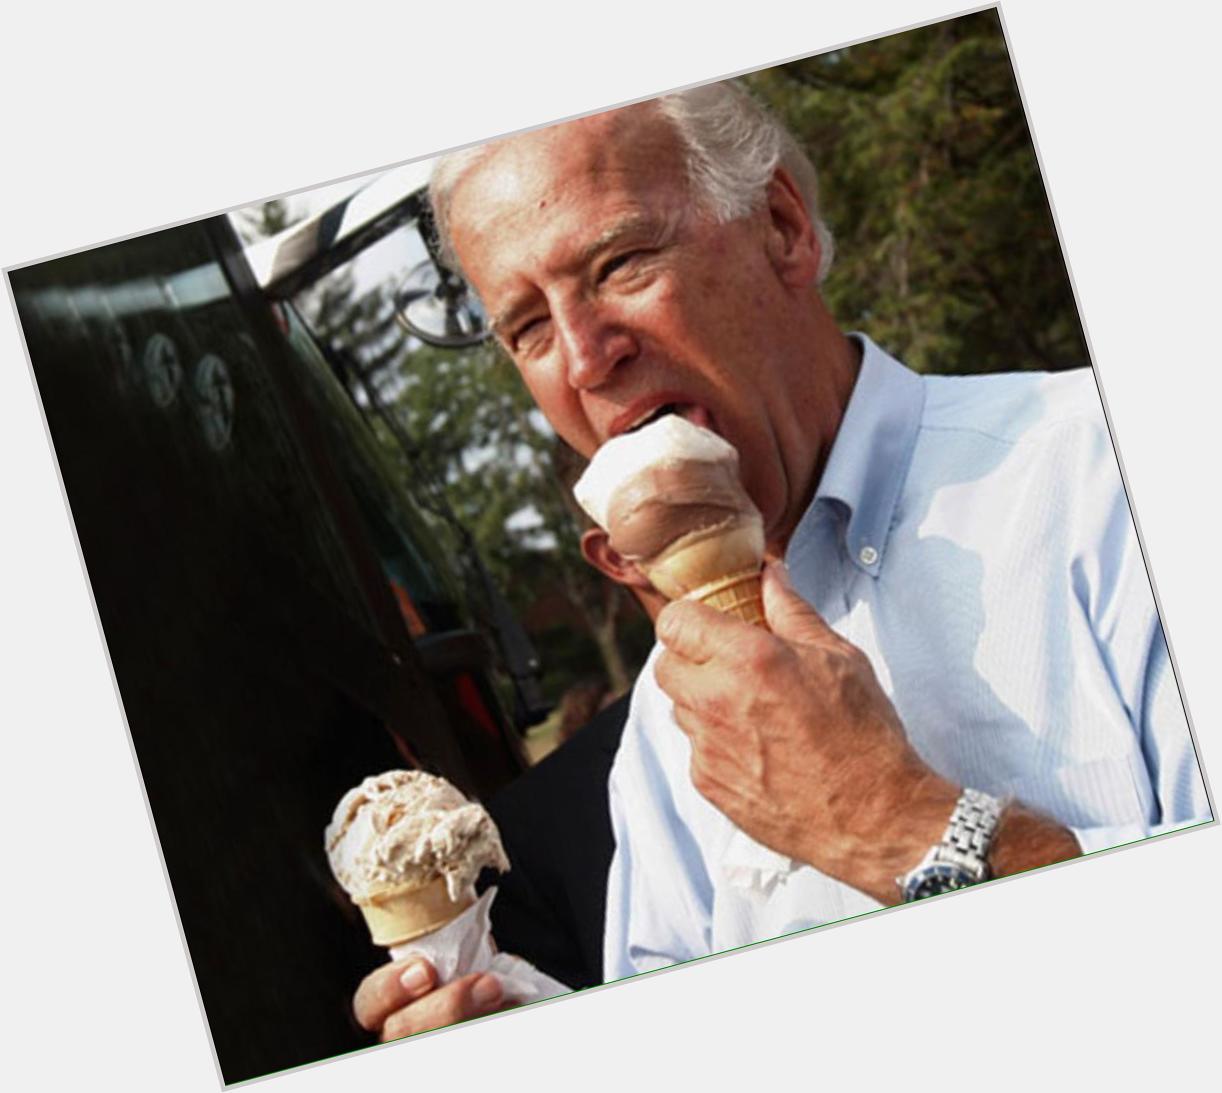 Happy birthday I dont have a picture of you so heres Joe Biden 